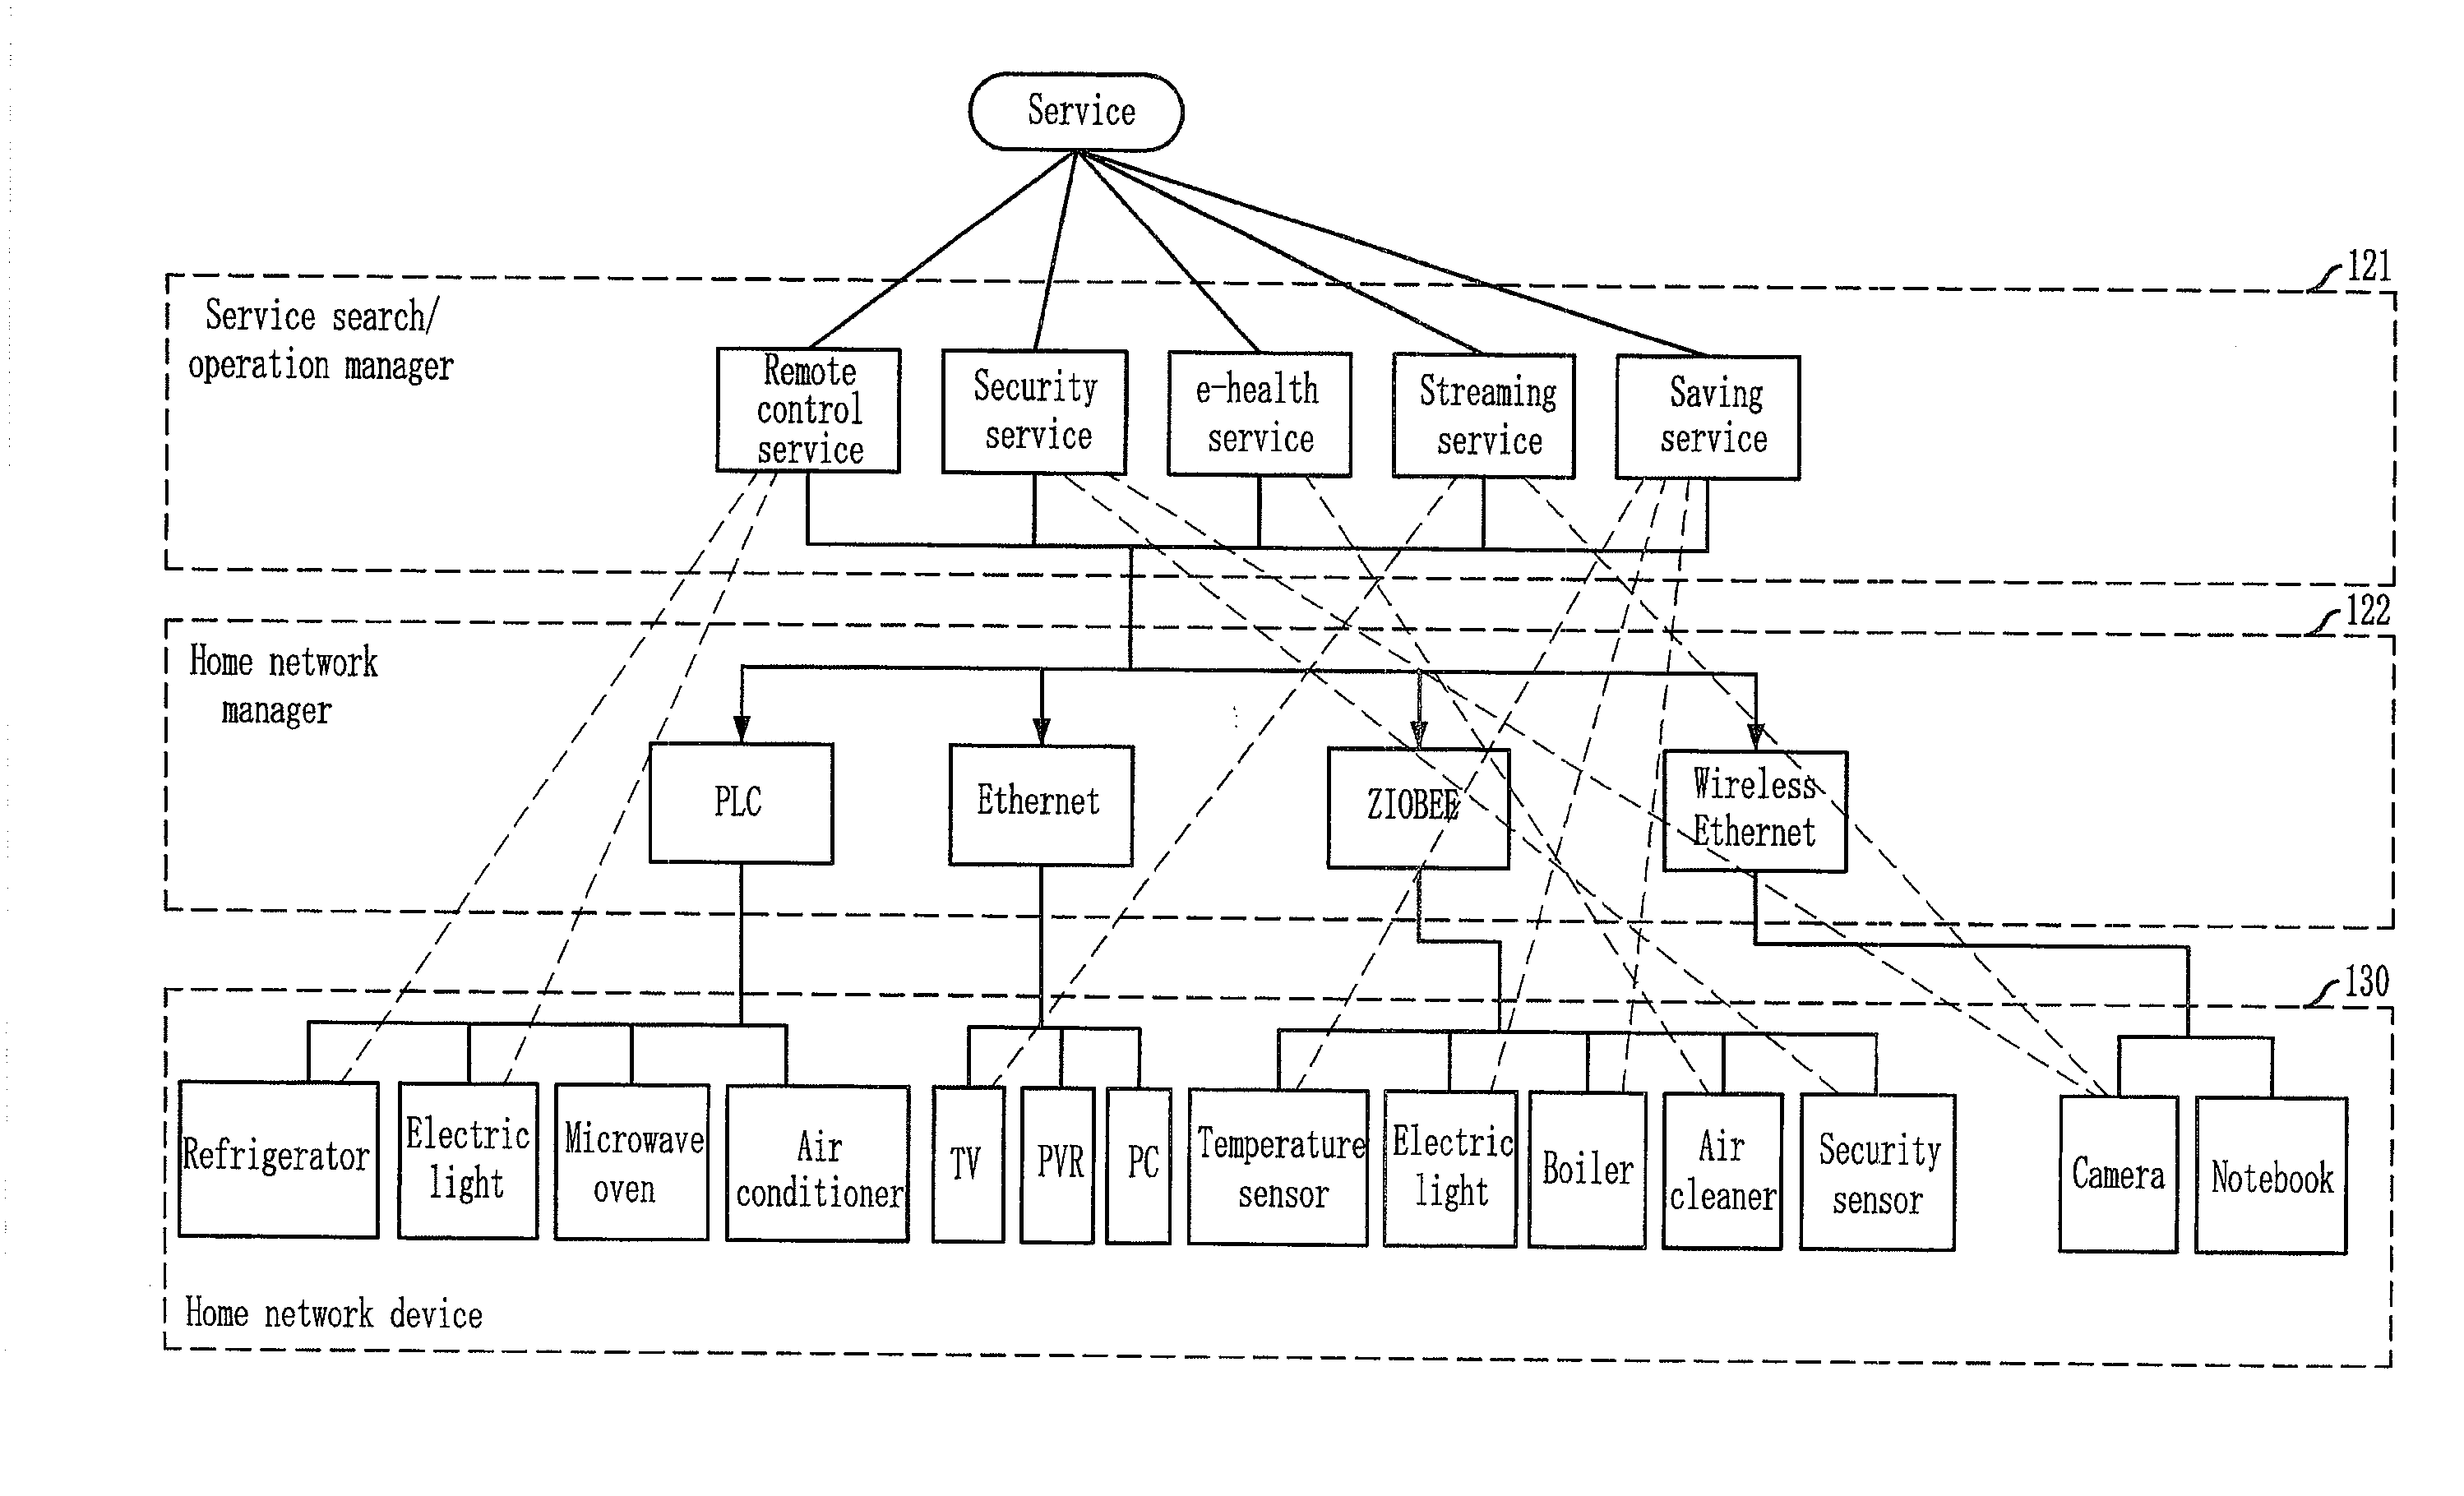 Apparatus and method for searching/managing home network service based on home network condition